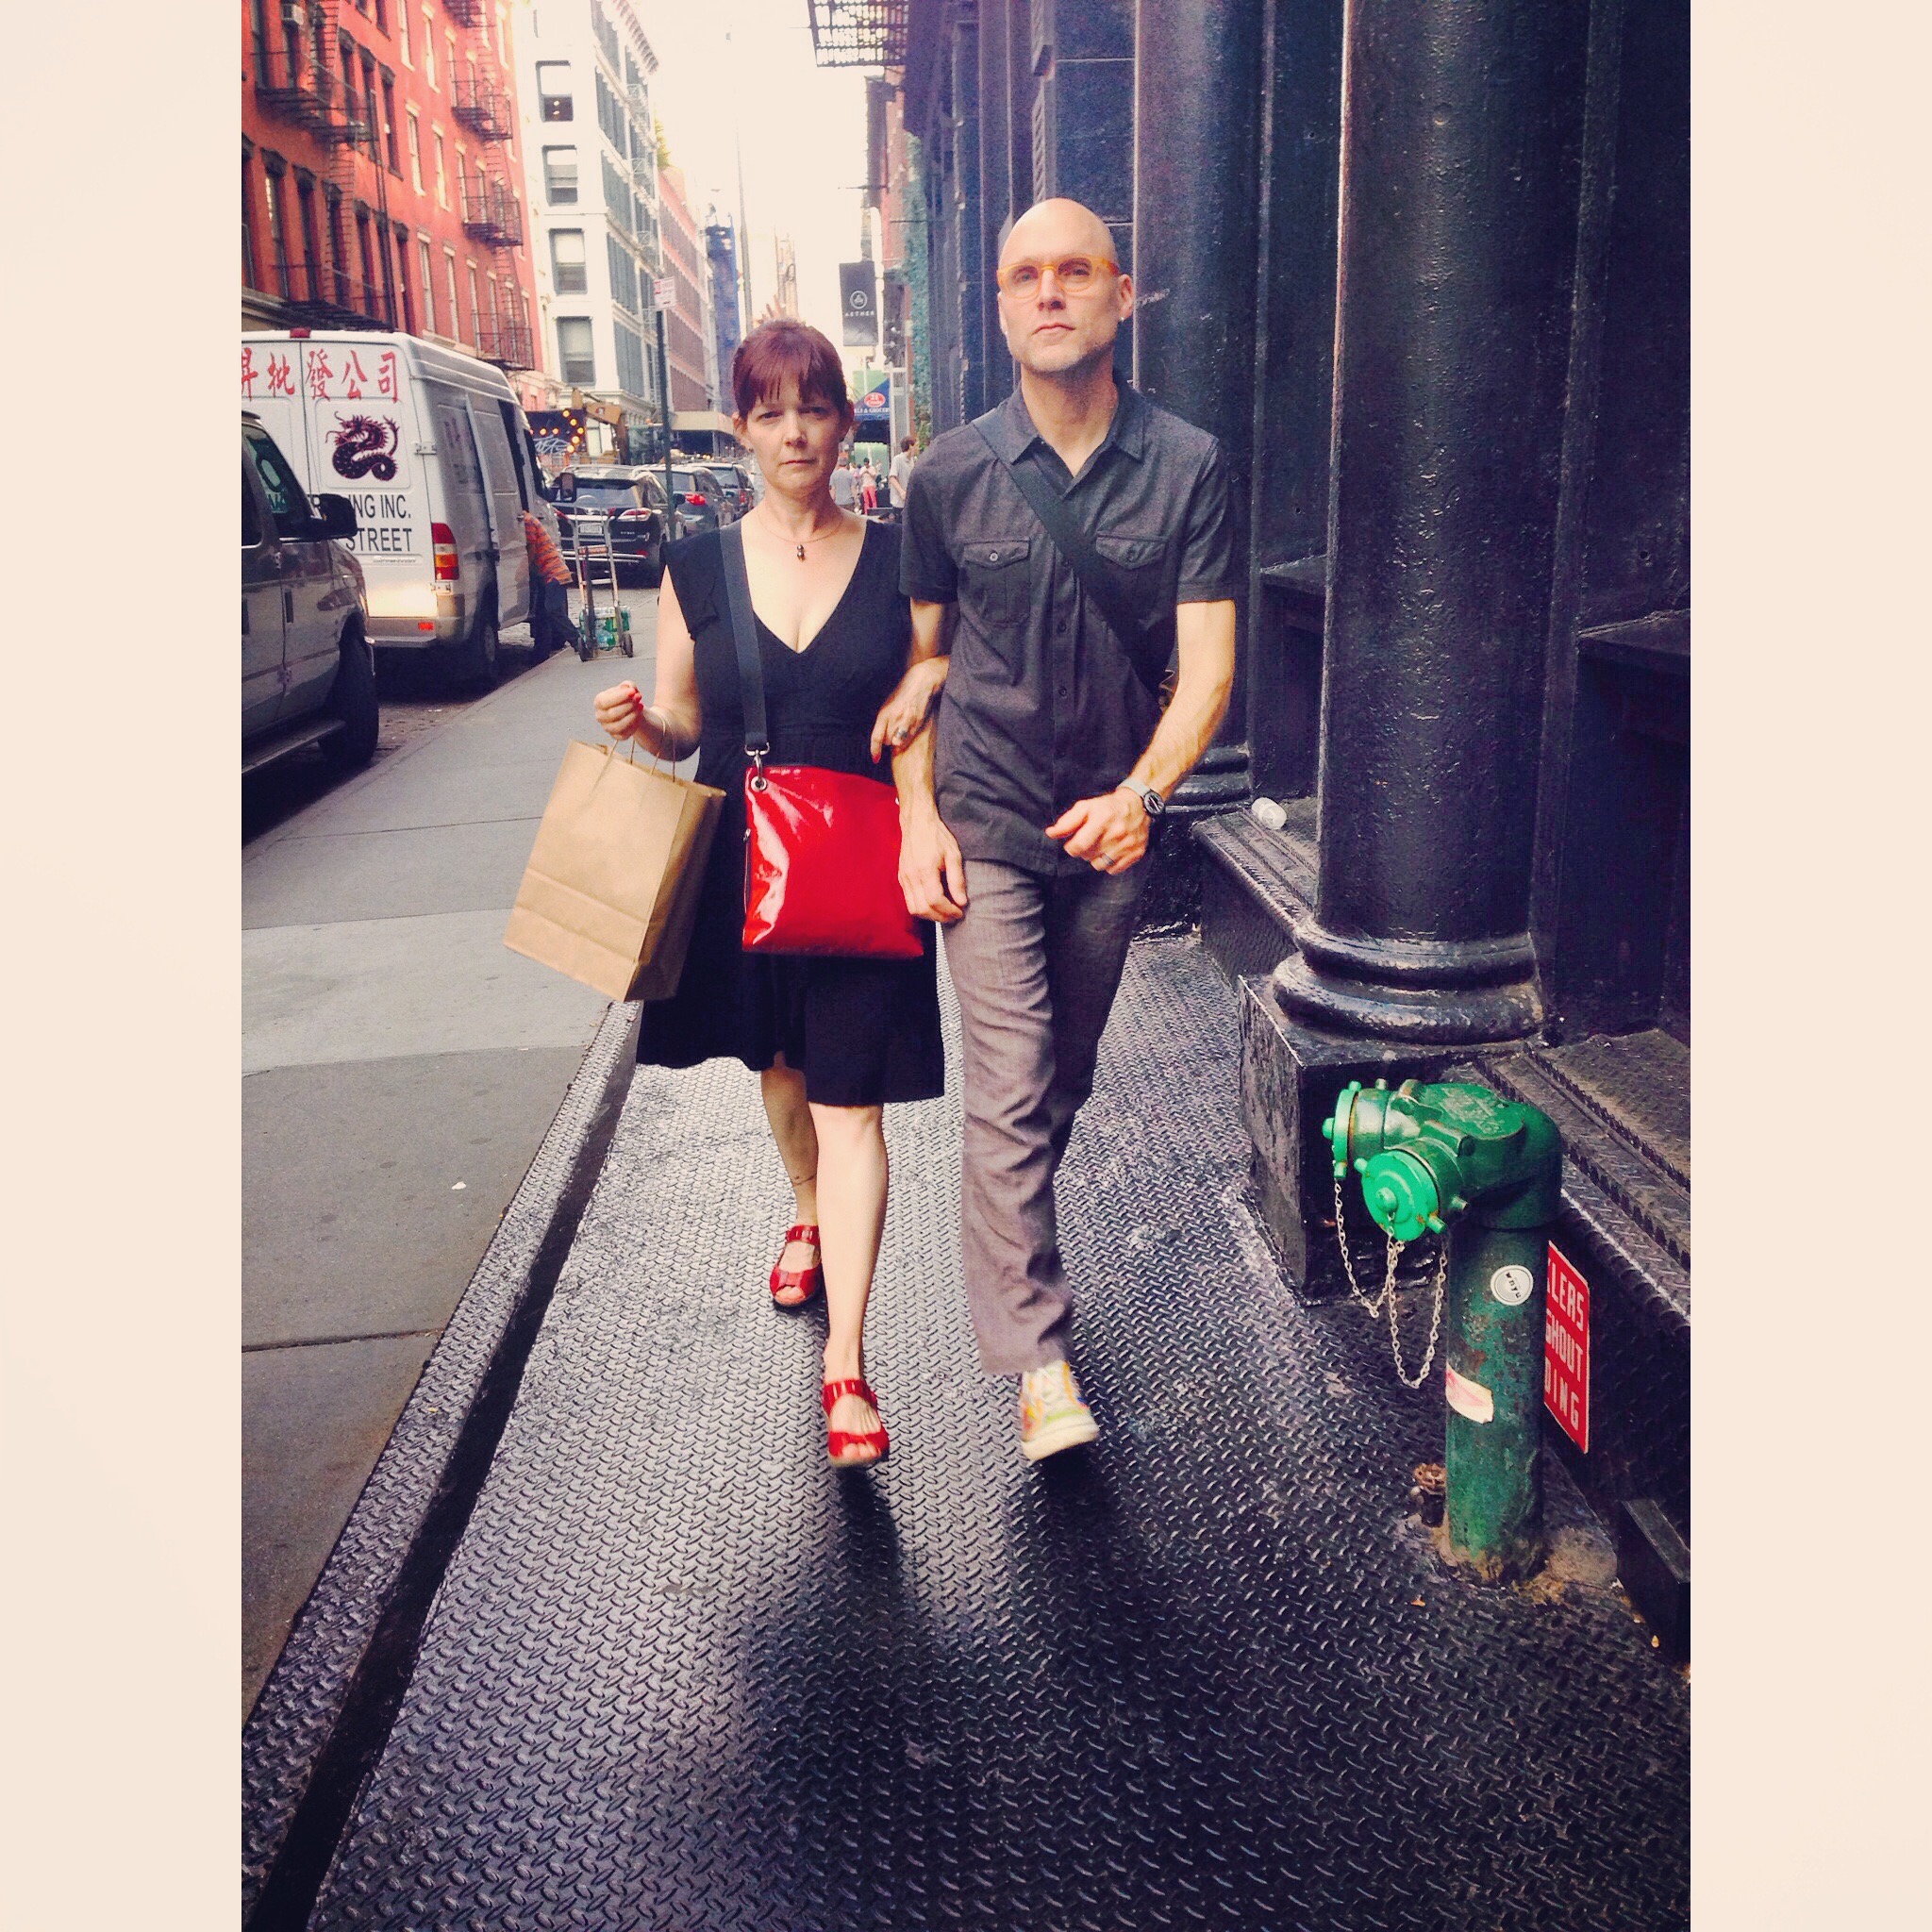 Mossy's parents walking on the street